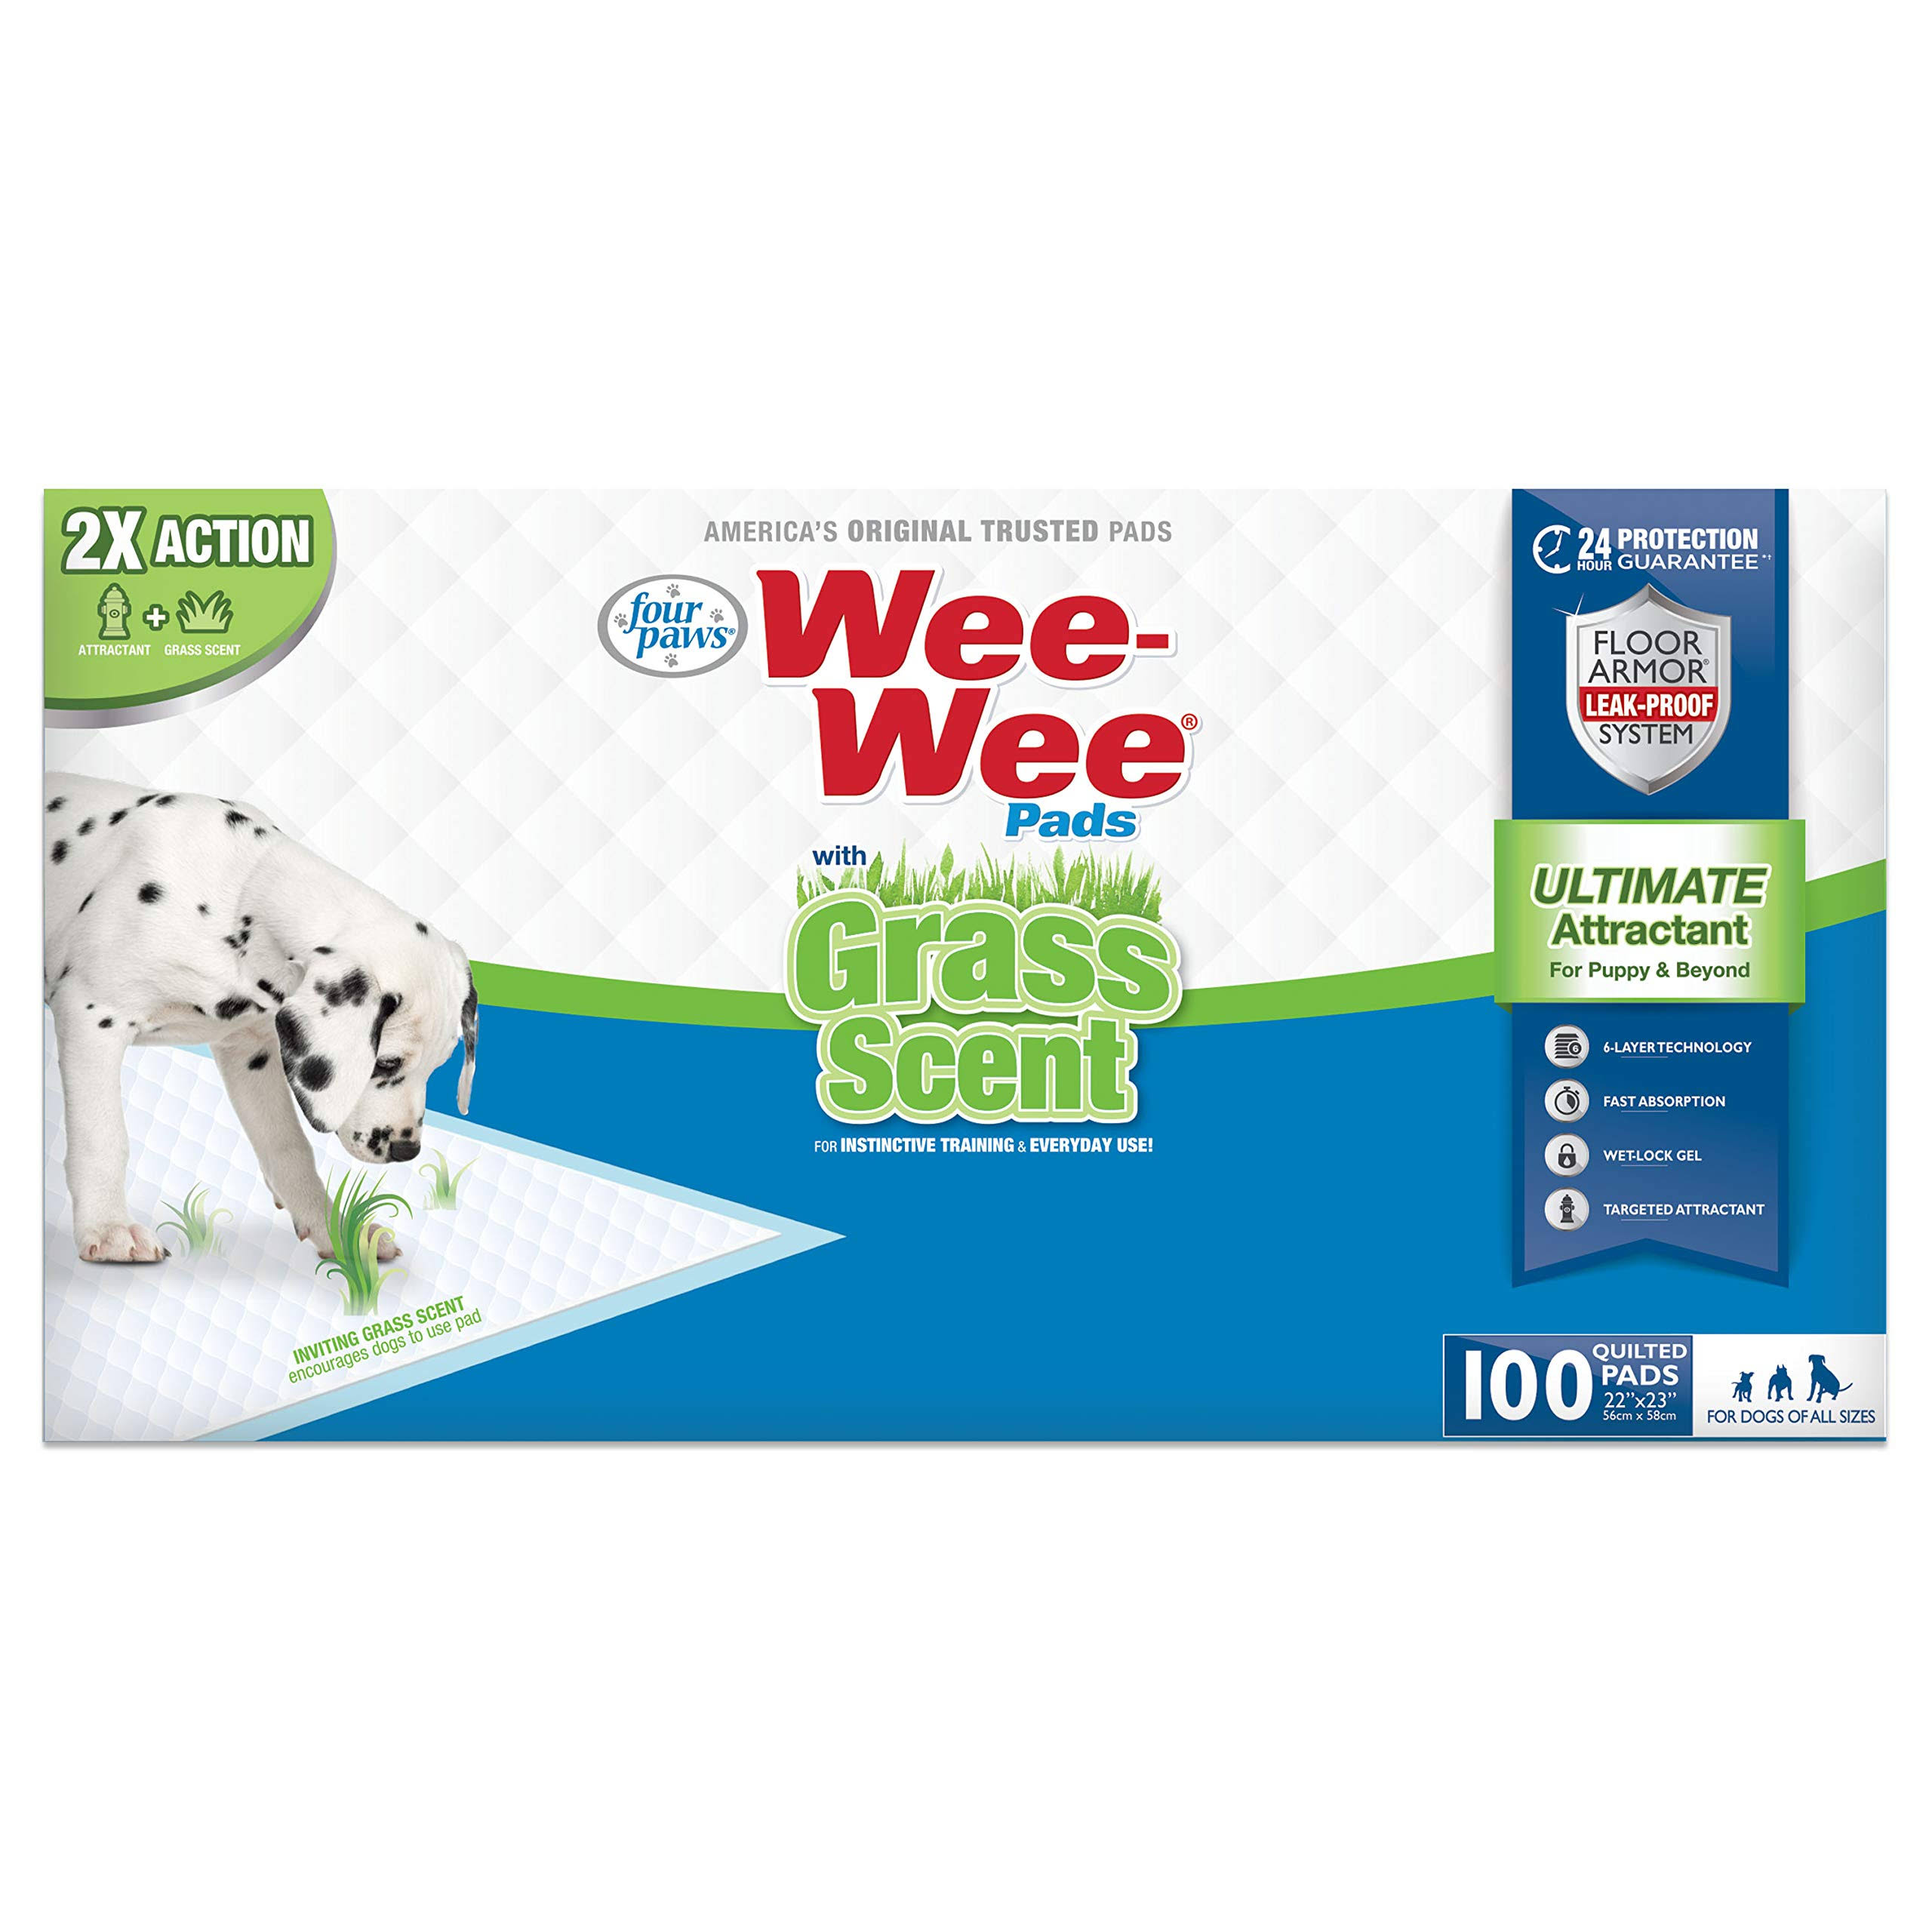 Four Paws Wee-Wee Grass Scented Puppy Pads Grass Scented 100 Count